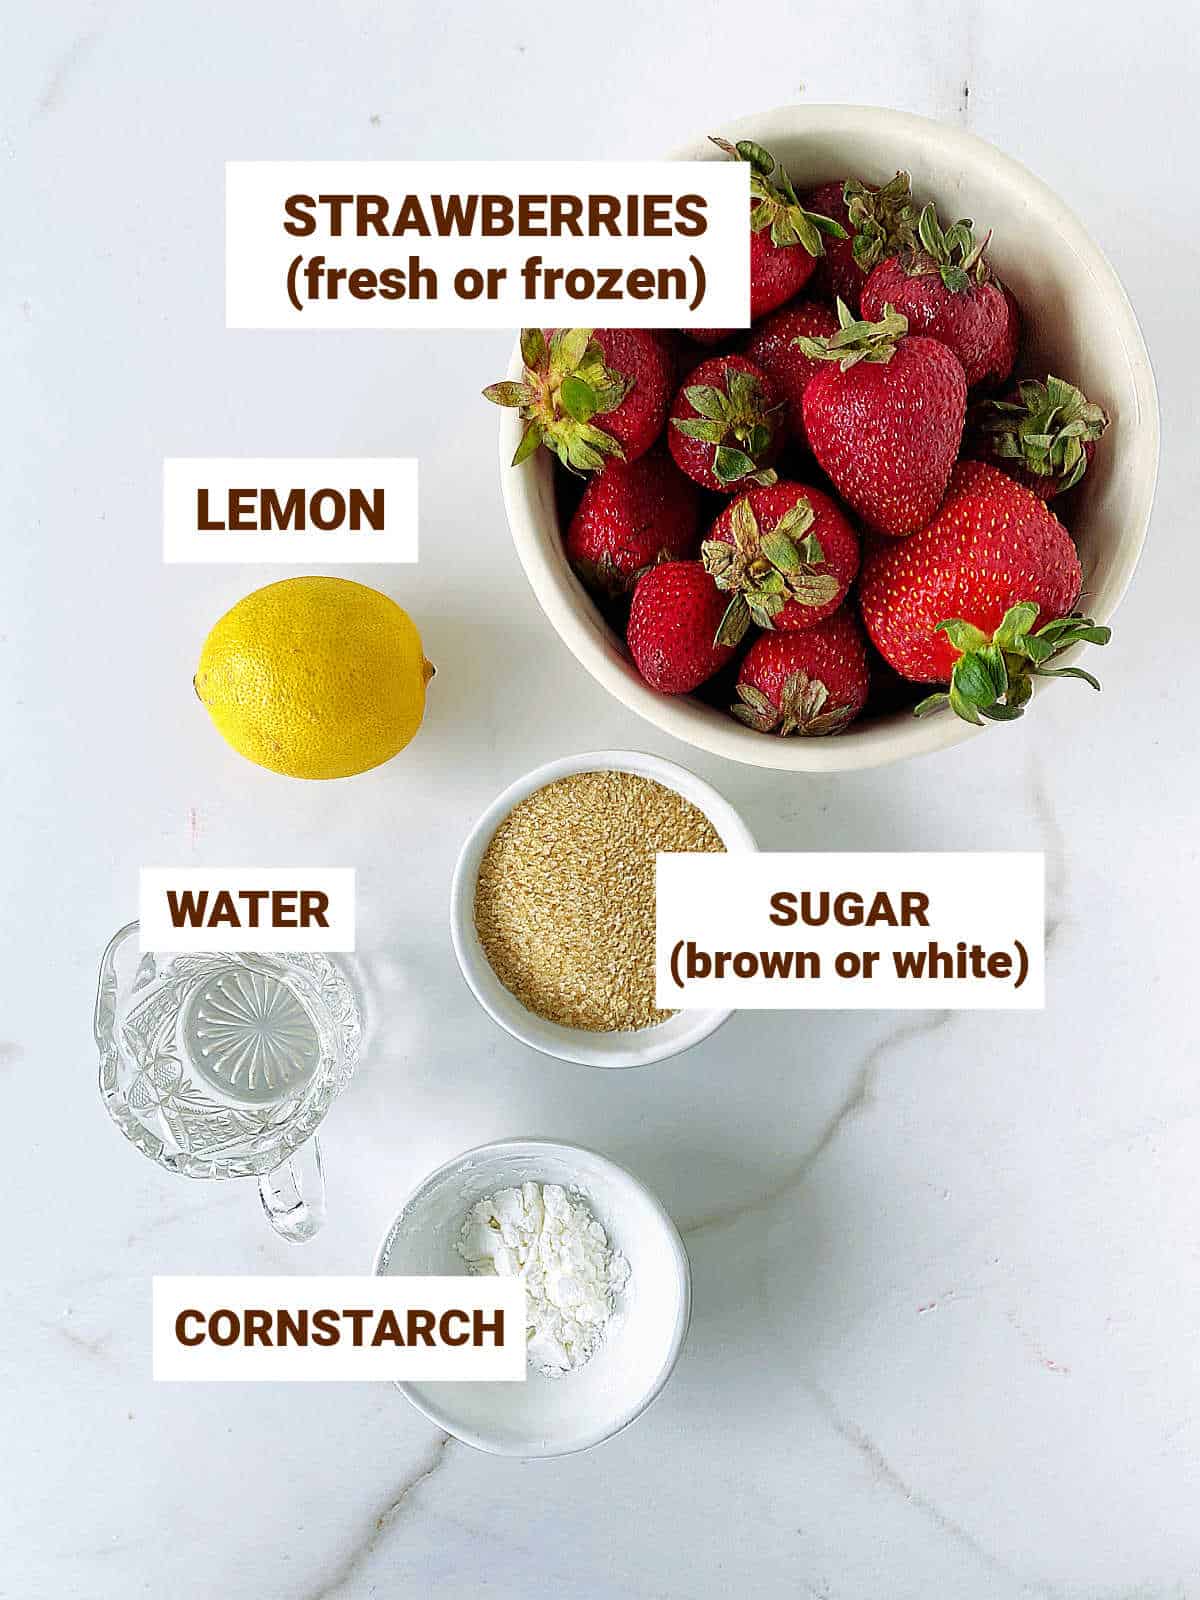 White surface with ingredients for strawberry sauce including whole lemon and brown sugar